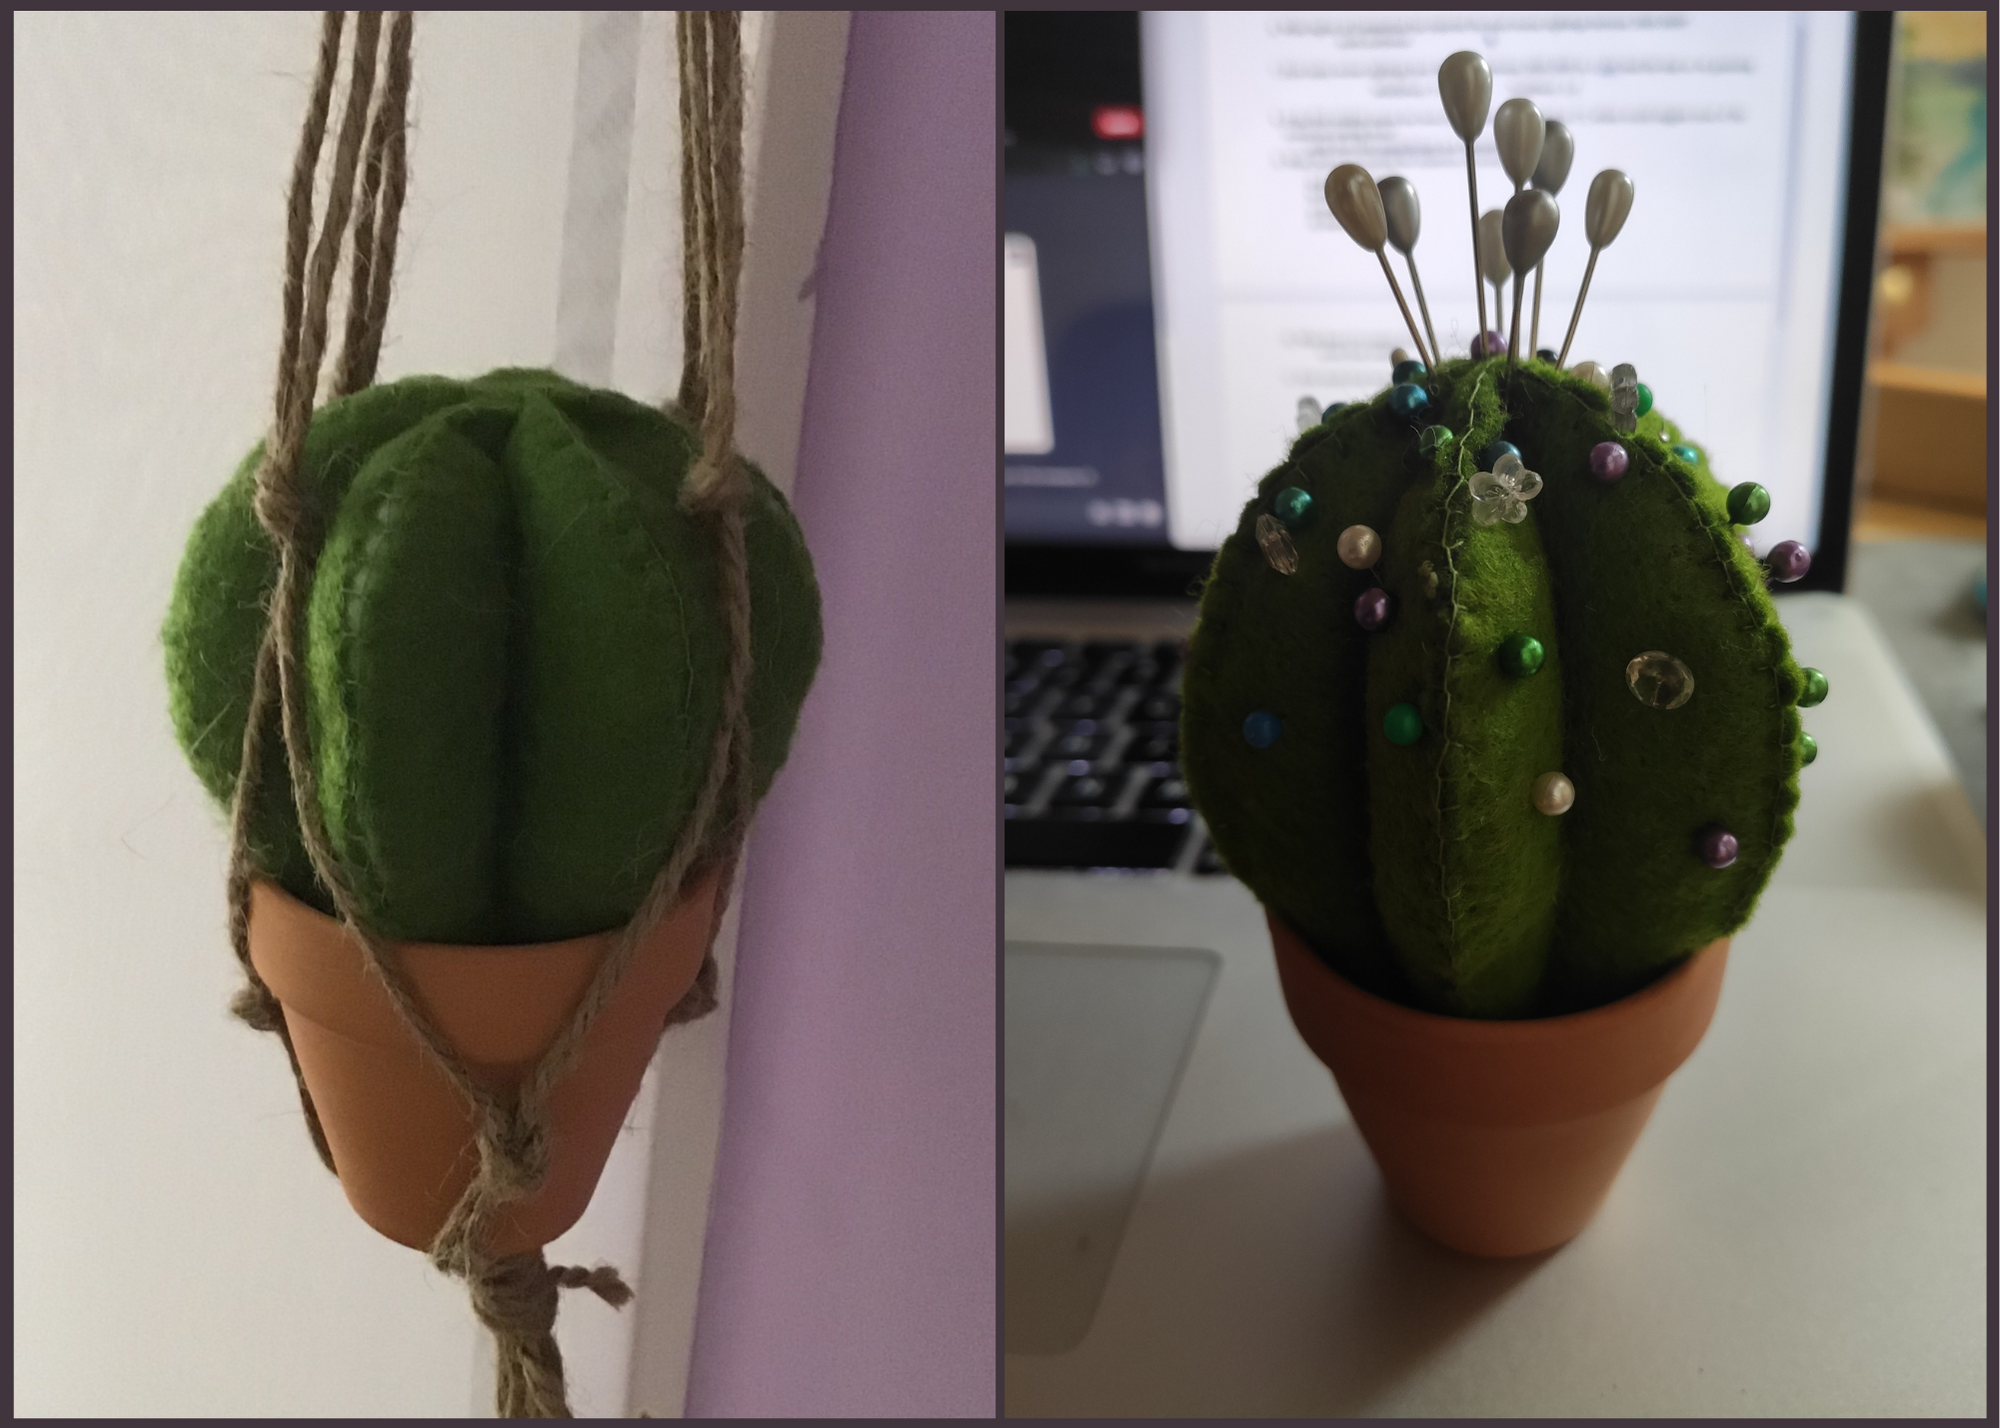 Two small felt barrel cacti in terracotta pots. The left one is hanging from a macrame plant holder. The right one is being used as a pin cushion.